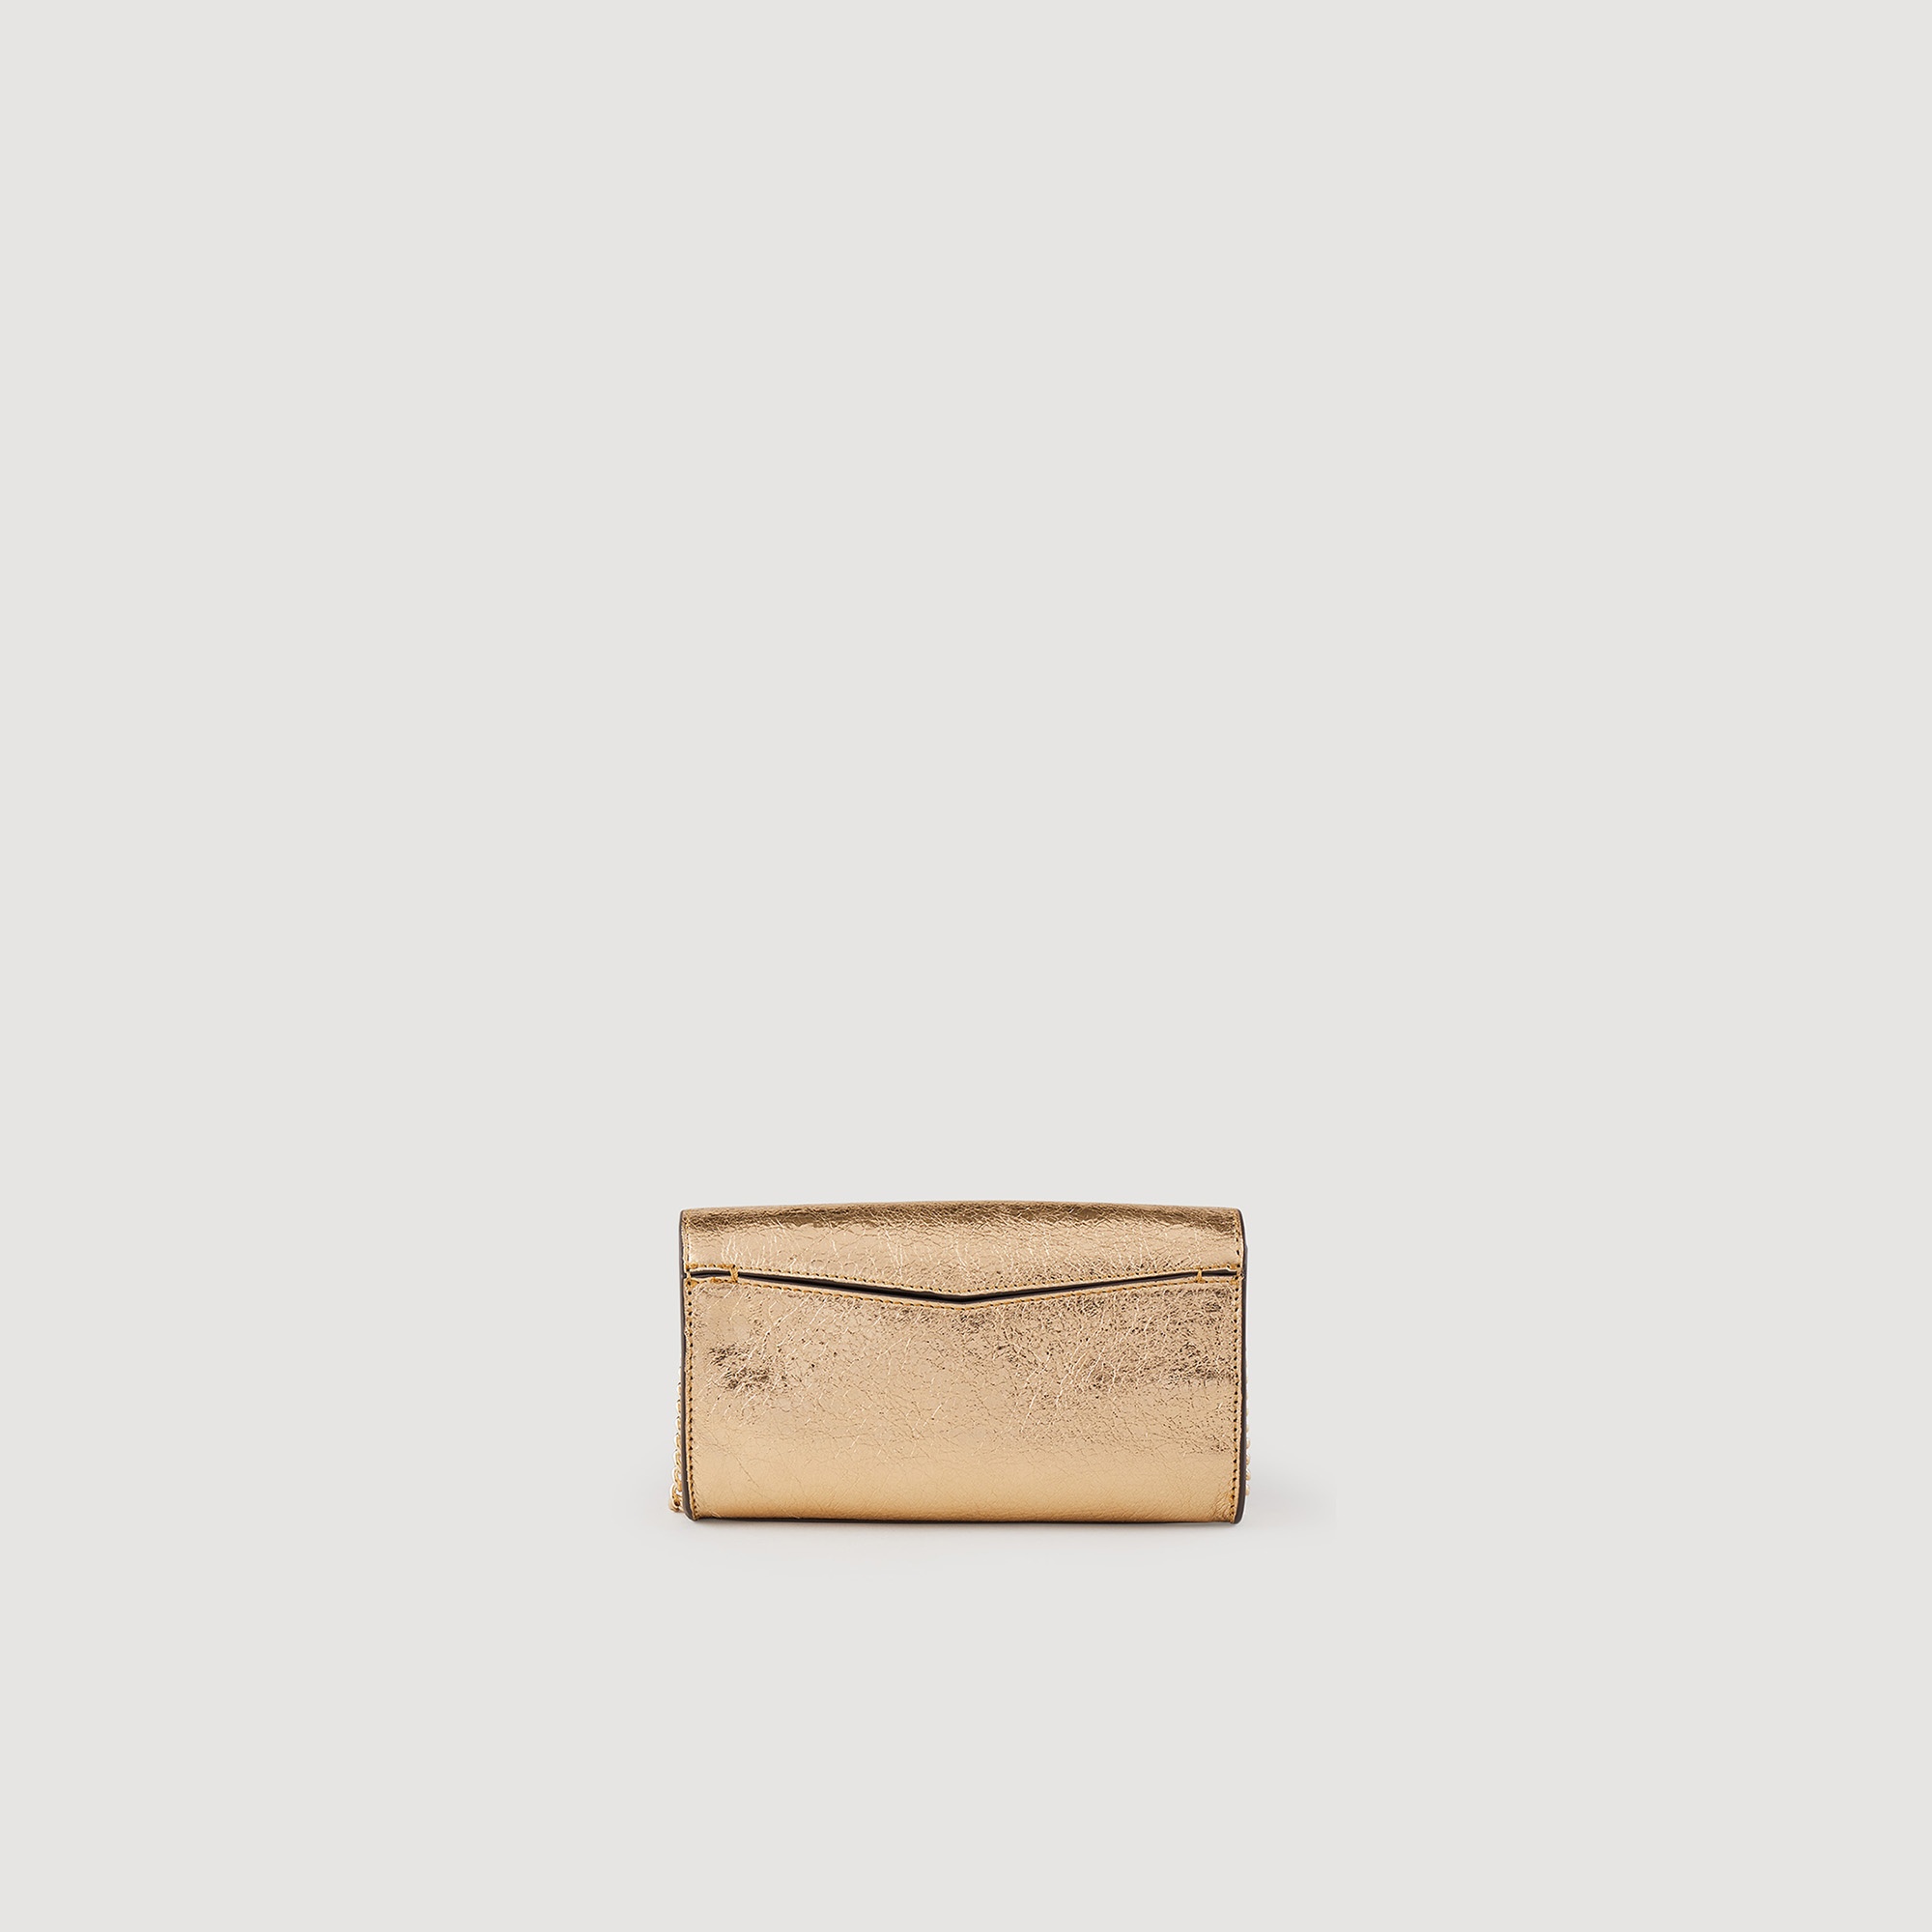 Gold leather clutch bag - 5